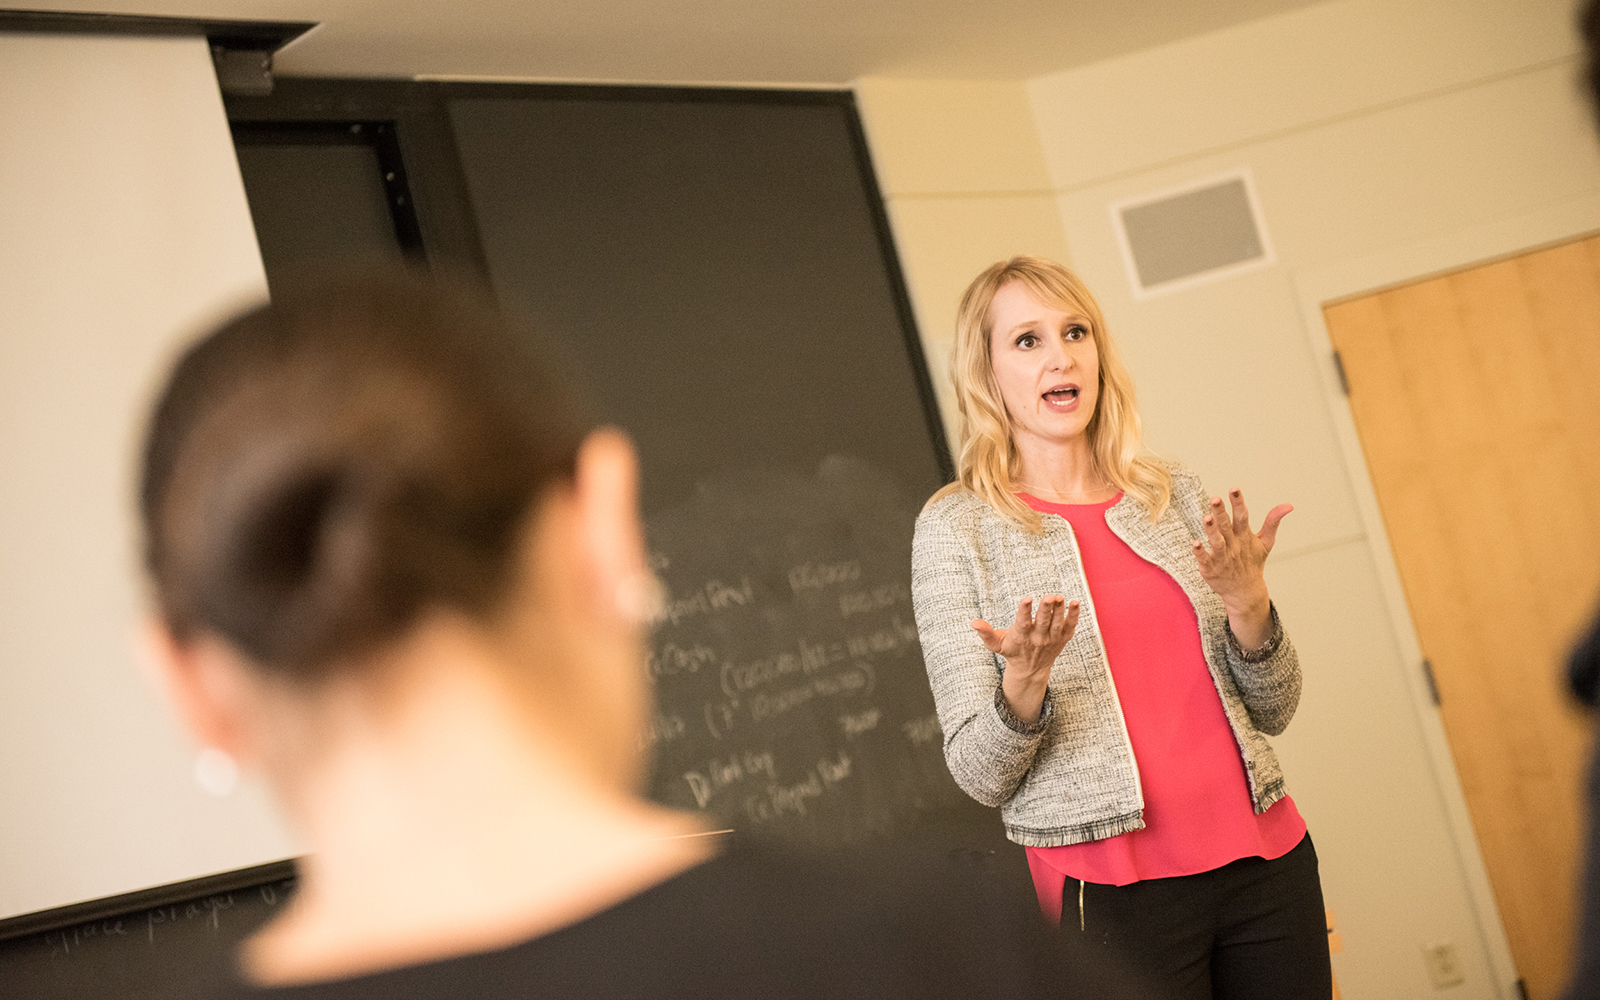 Pictured above, Professor Anna Bergman Brown teaches students at the University of Connecticut.